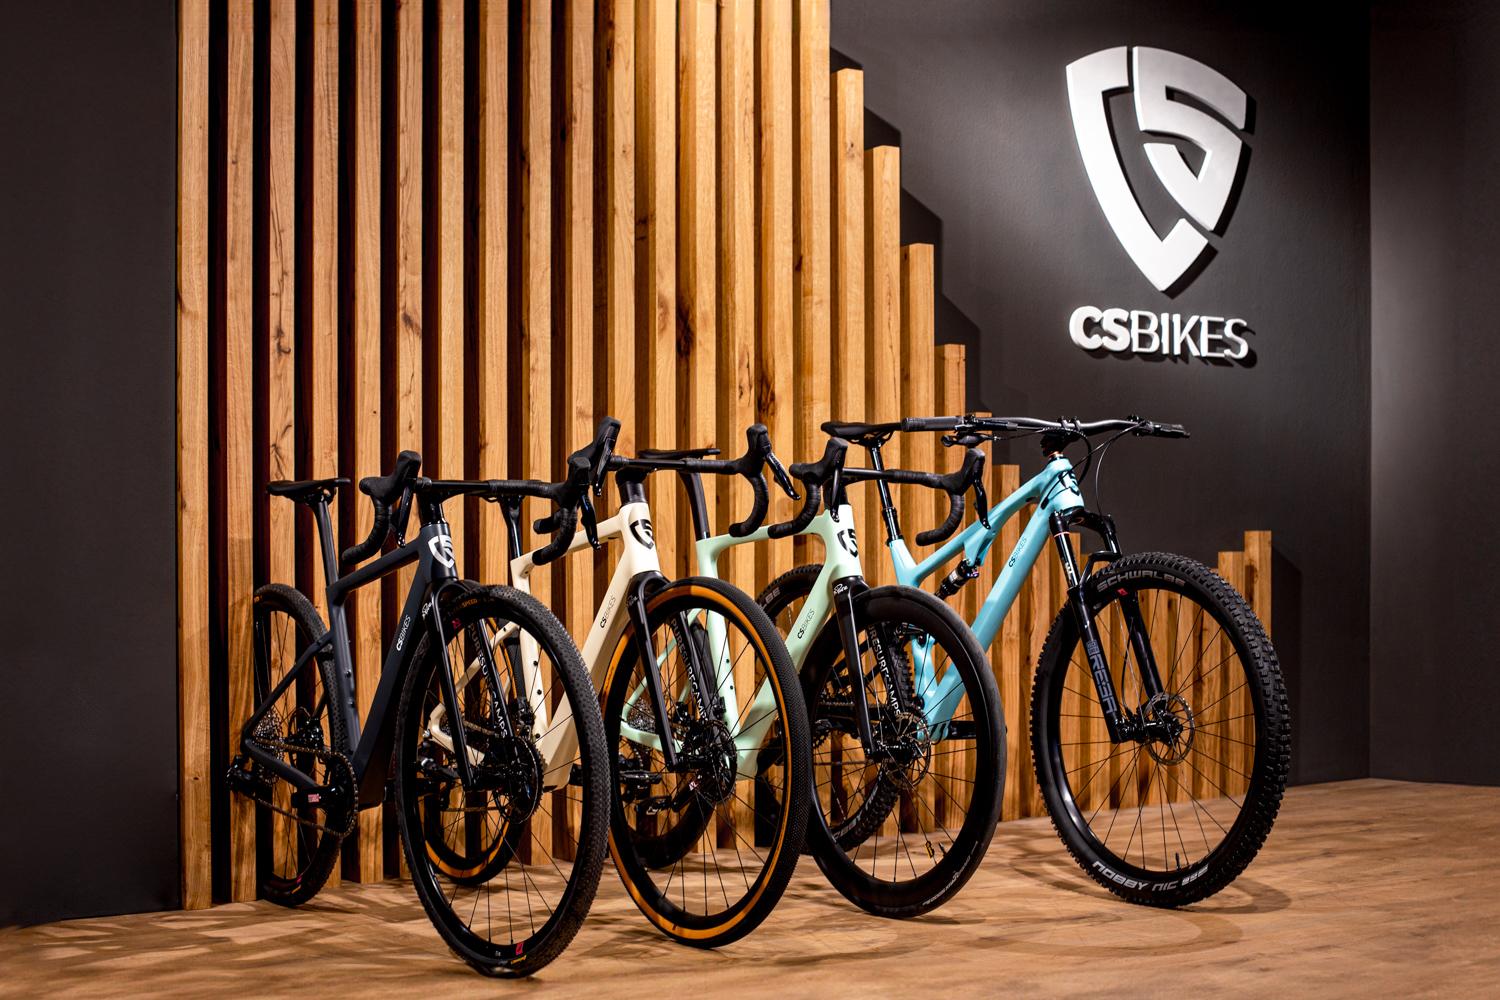 Explore the impressive variety of our bikes:
ROAD, MOUNTAIN and GRAVEL.
Exchange ideas with our experts on site. Admire the latest models and find the perfect bike for your needs, whether you are a beginner or an experienced cyclist.